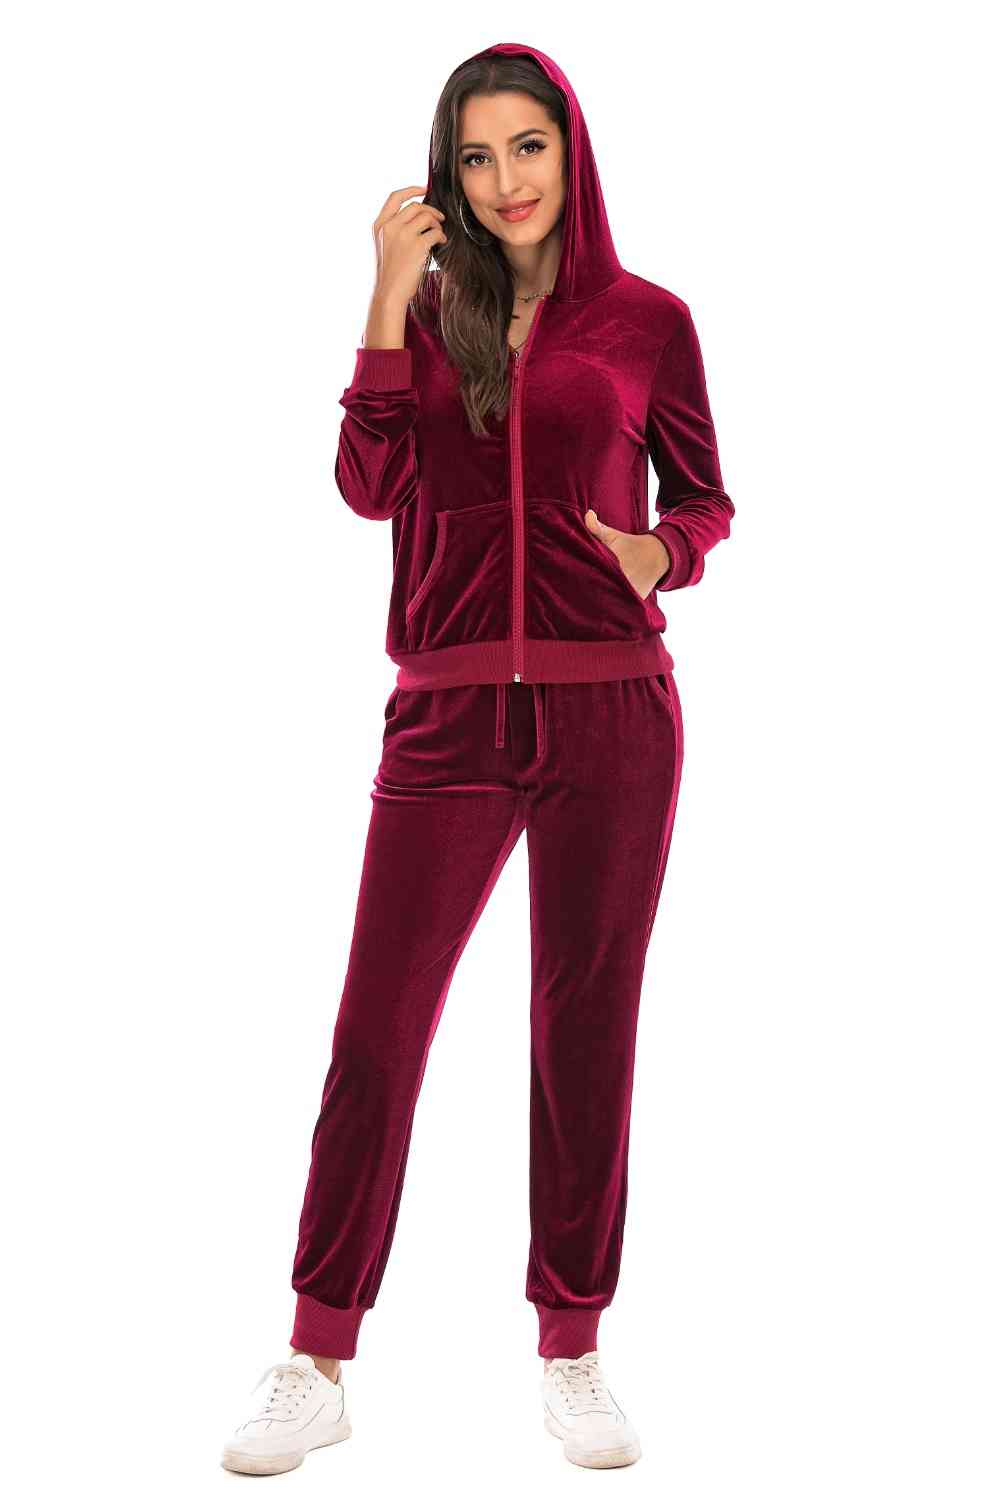 Dark Red Zip-Up Hooded Jacket and Pants Set New Year Looks